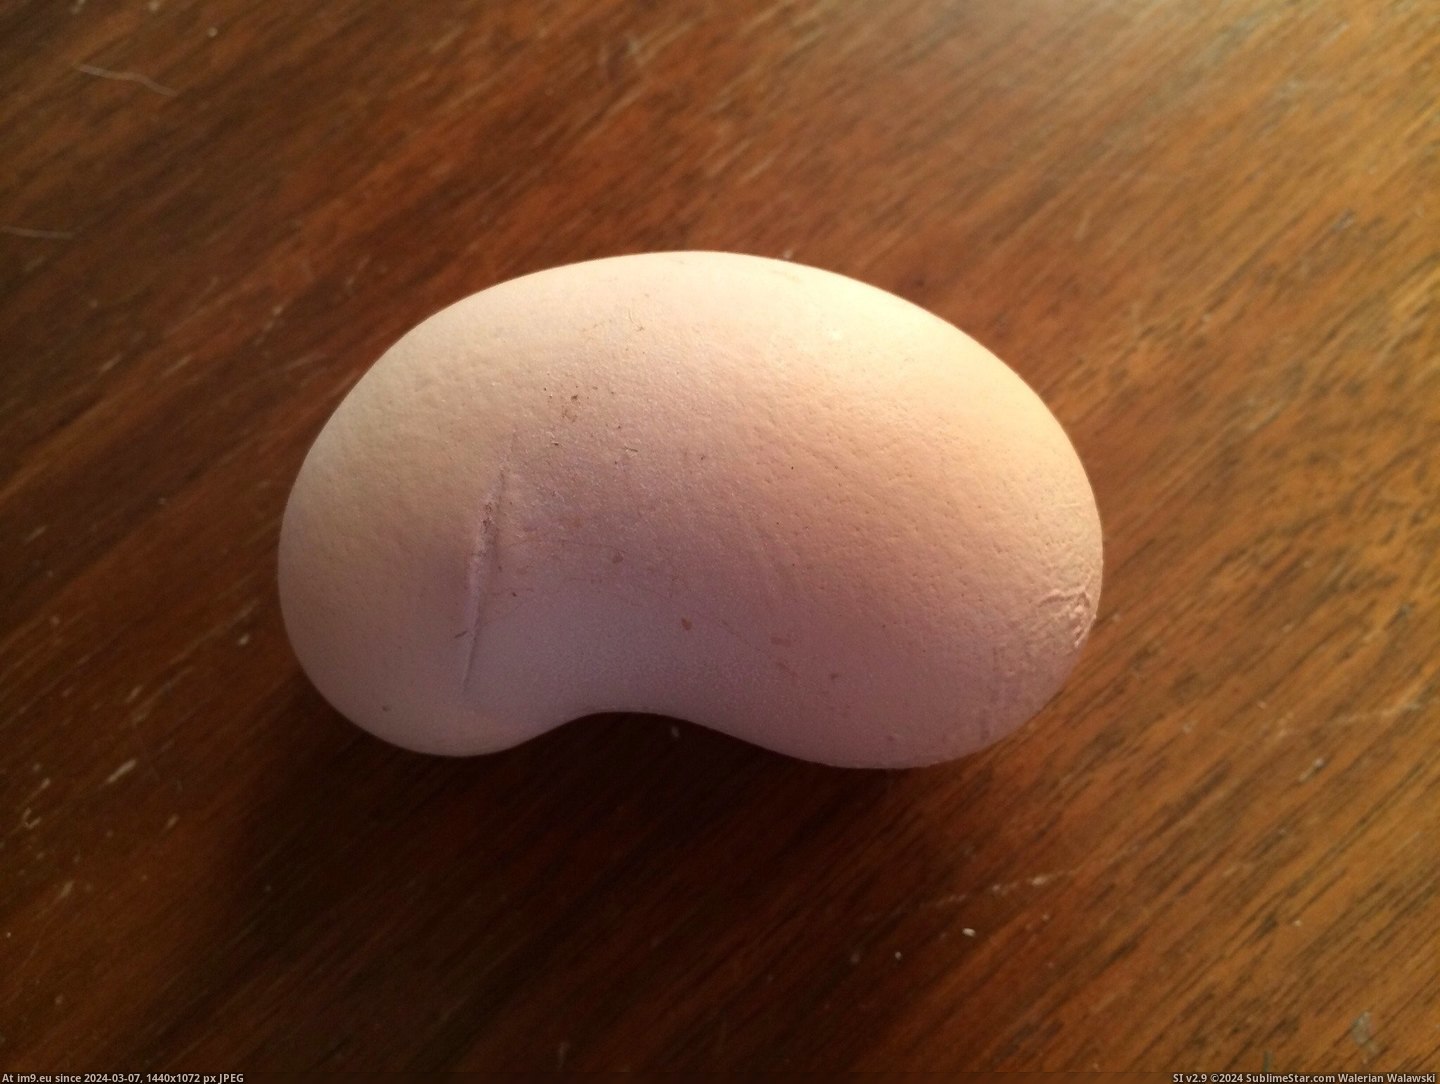 #One #Shaped #Chickens #Bean #Kidney #Egg #Laid [Mildlyinteresting] Today one of my chickens laid an egg shaped like a kidney bean. Pic. (Изображение из альбом My r/MILDLYINTERESTING favs))